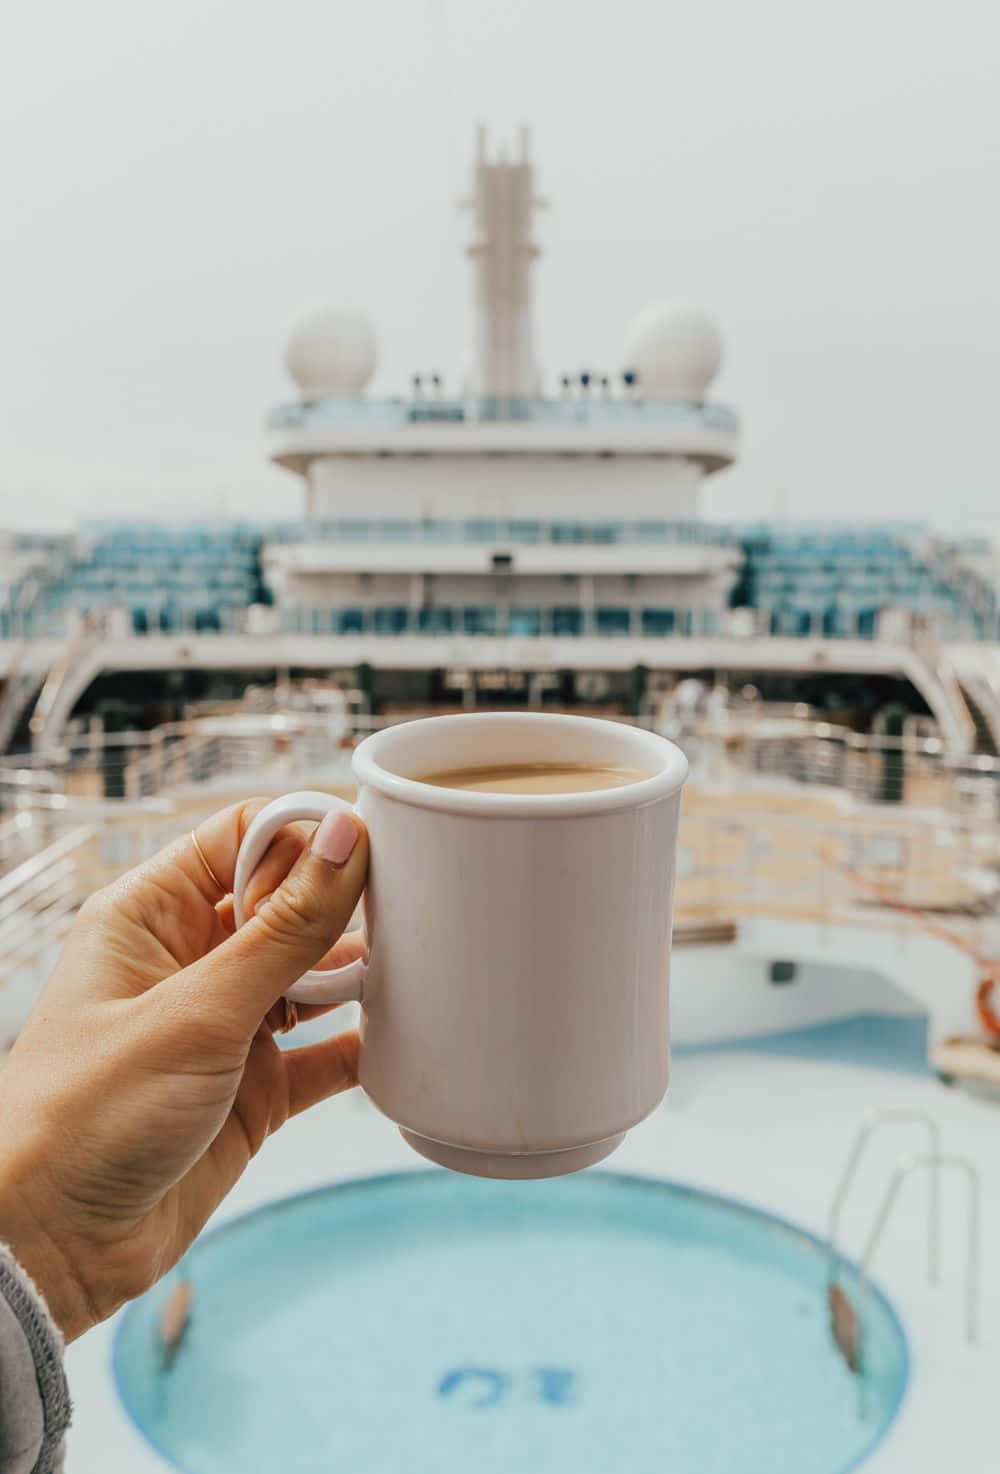 Holding Coffee Cup In Cruise Ship Picture